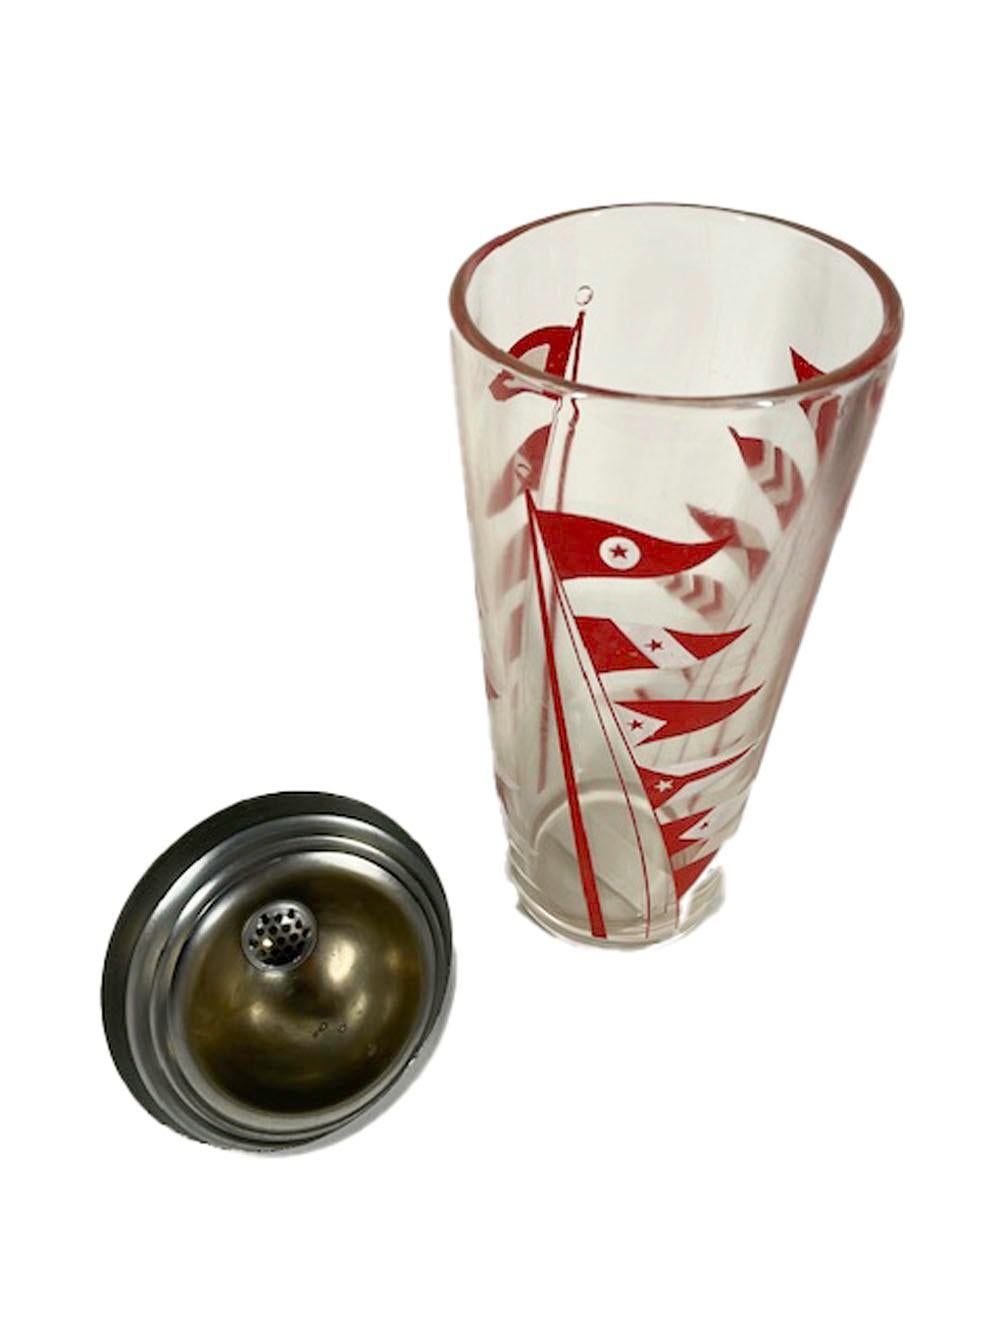 American Art Deco Hazel-Atlas Cocktail Shaker with Red and White Nautical Flags